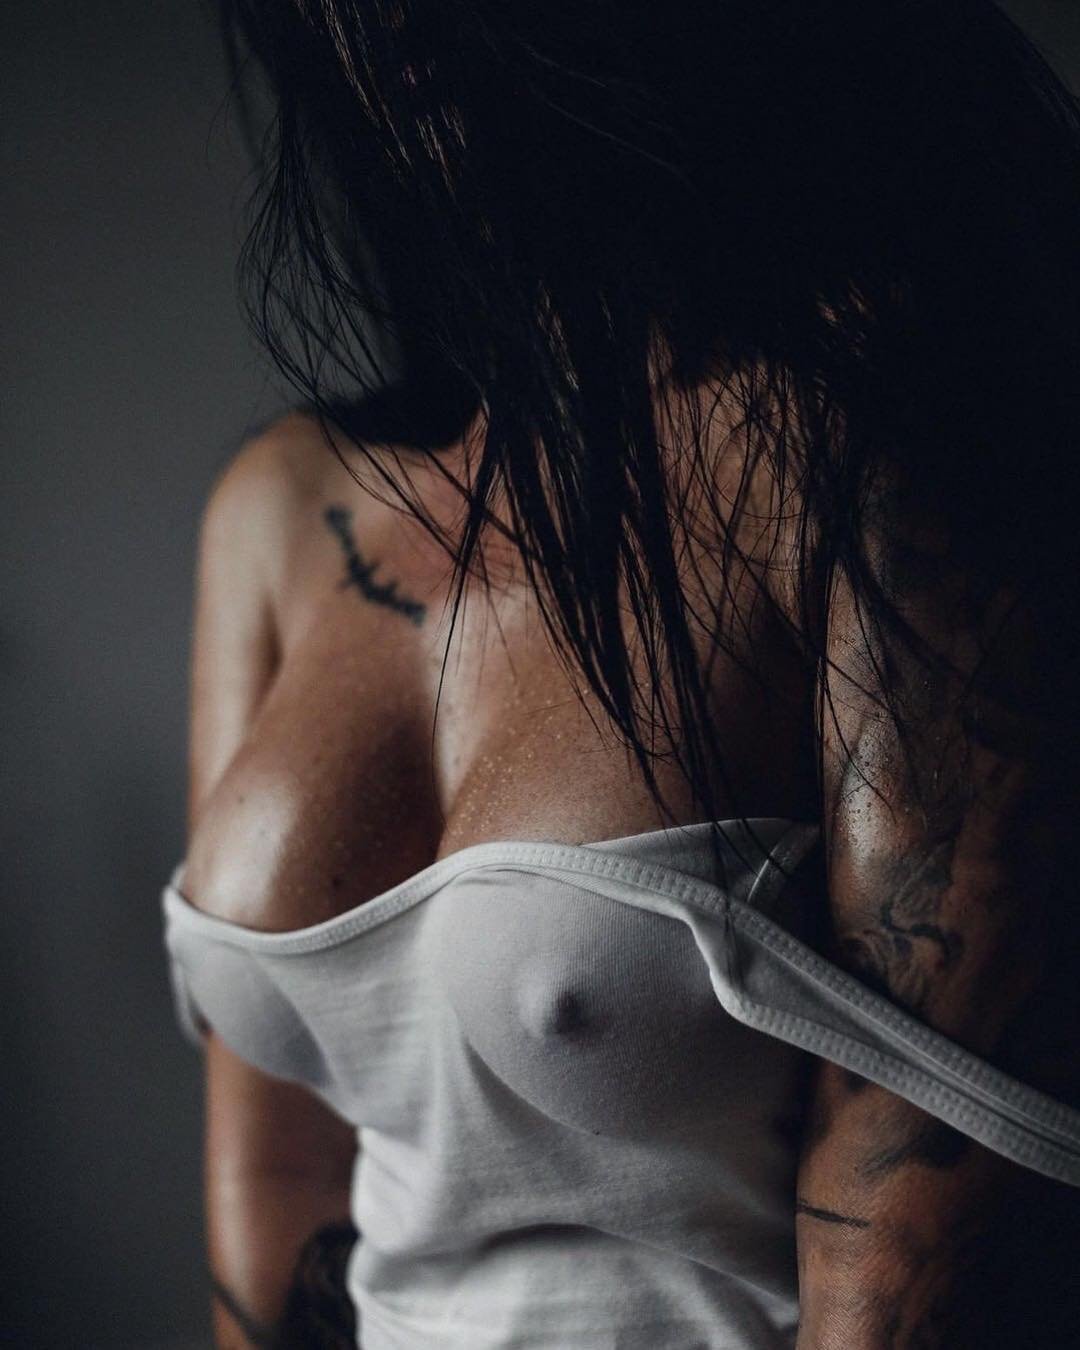 Photo by Devynsdogg with the username @Devynsdogg,  March 19, 2019 at 5:35 AM and the text says 'You can't hide behind thin cotton... #beautifulgirls #faketits #sexyfemales #awesomeboobs #beautifulbreasts #tattoo #fetish #sexylingerie'